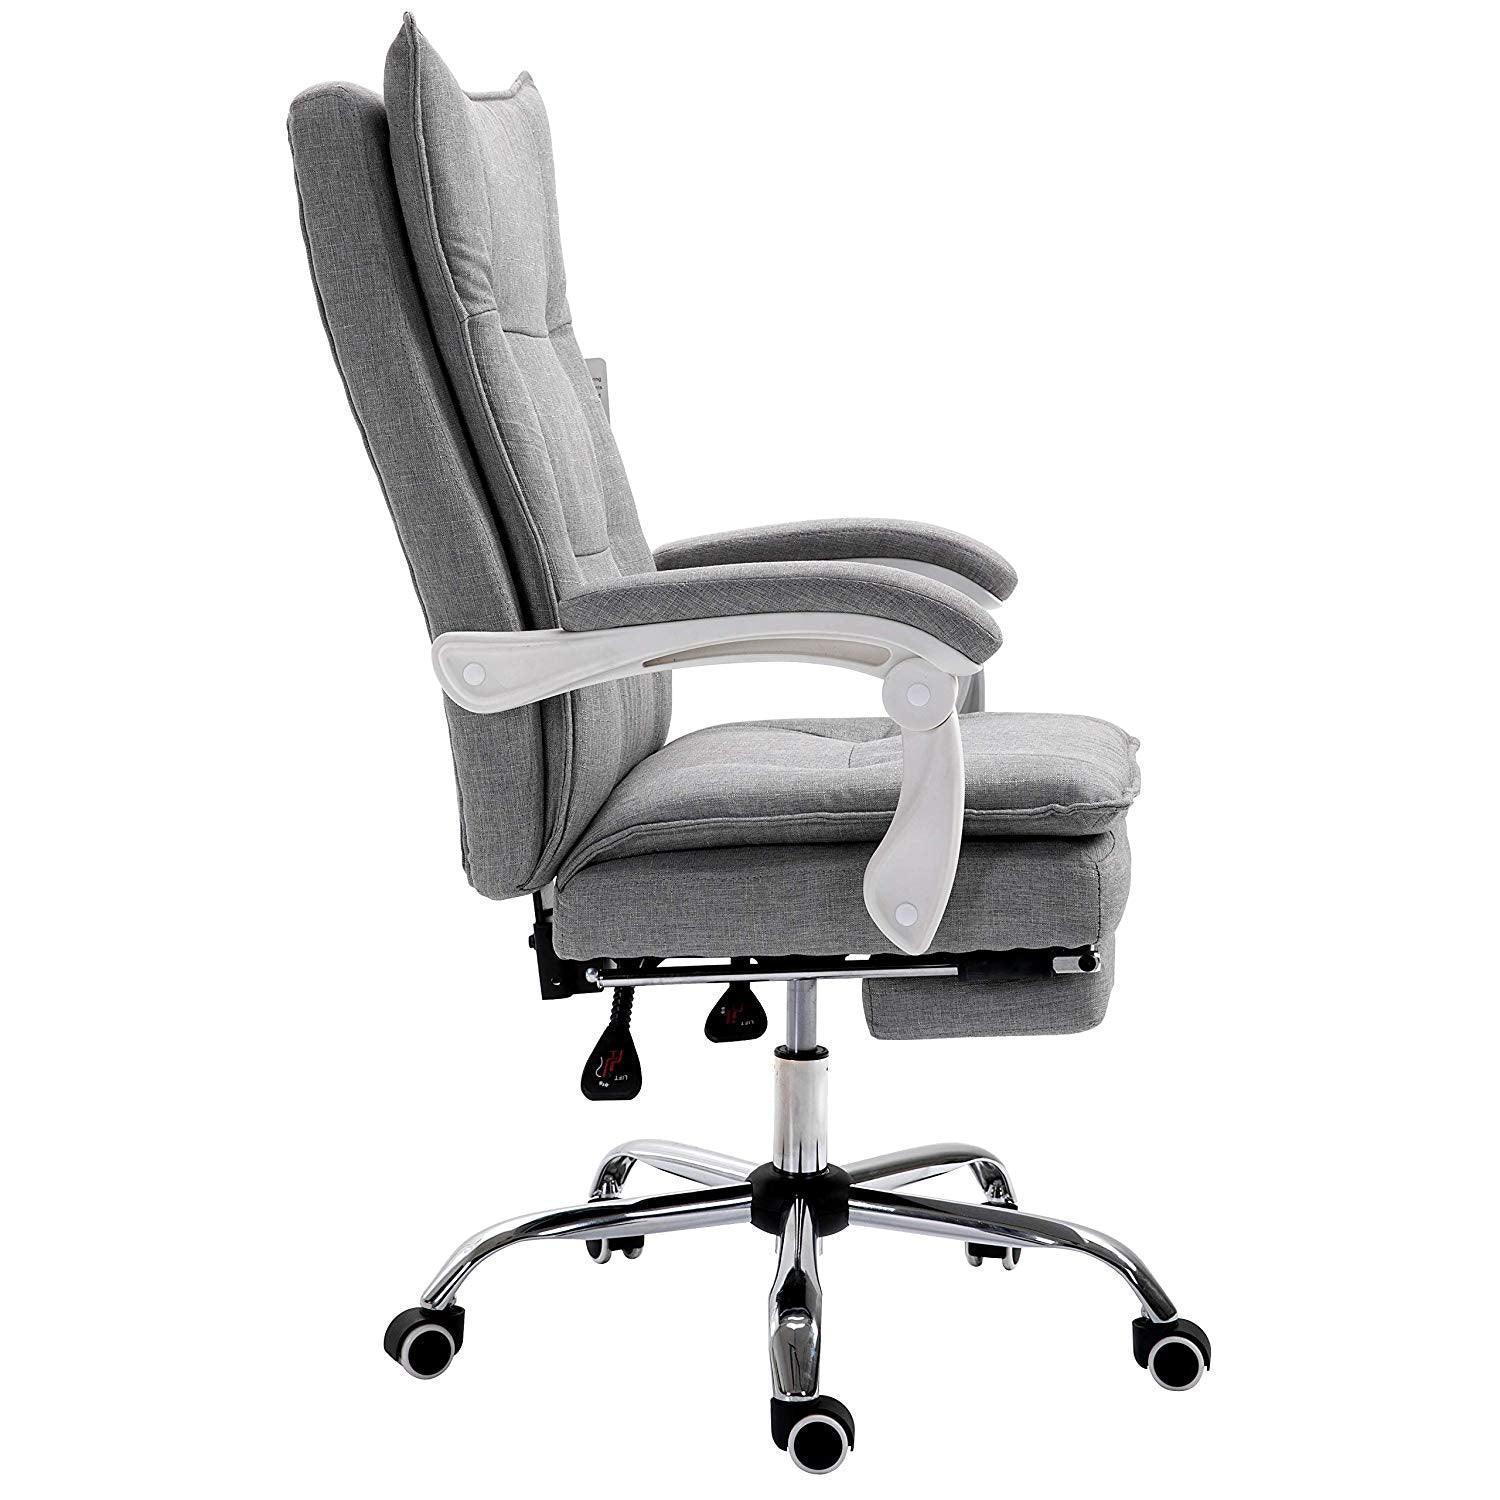 Executive Double Layer Padding Recline Office Desk Chair with Footrest, MR77 Grey Fabric